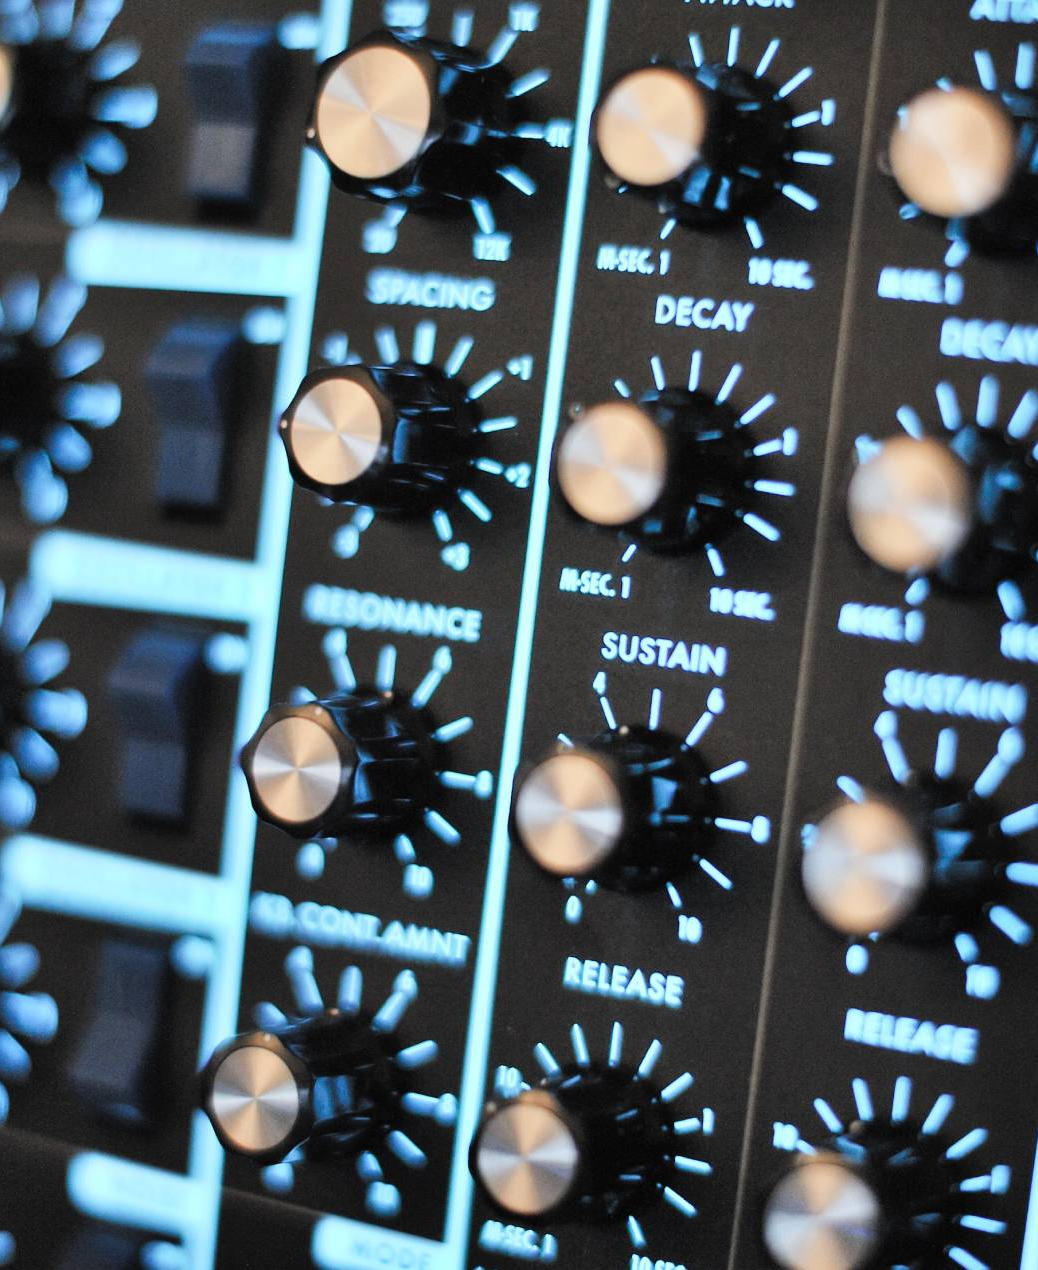 Moog launches new docu-series tracing early days of electronic music – NME